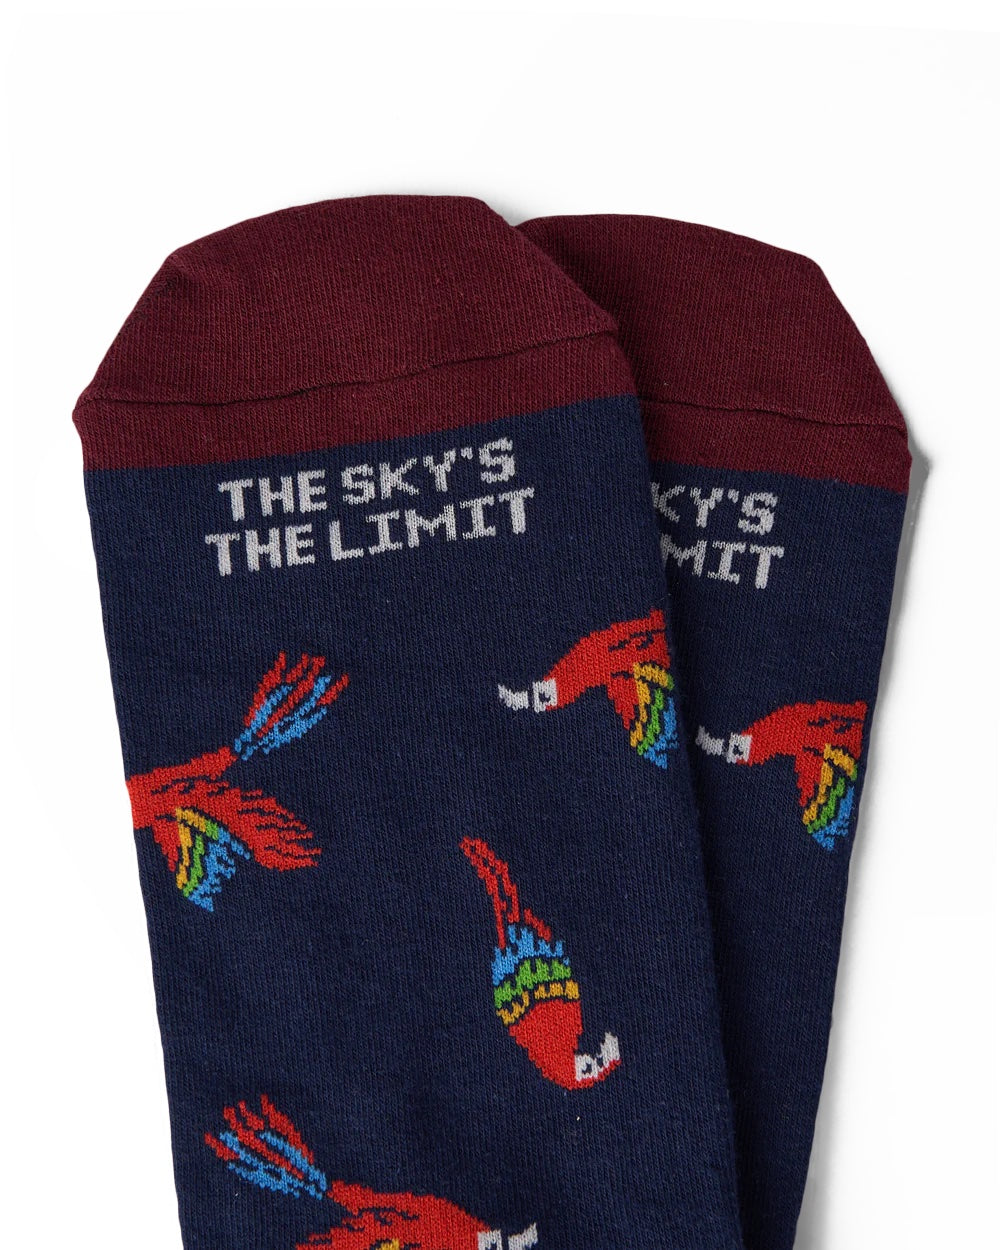 Talking Toes Soaring Macaw One Size Crew Socks for Adults